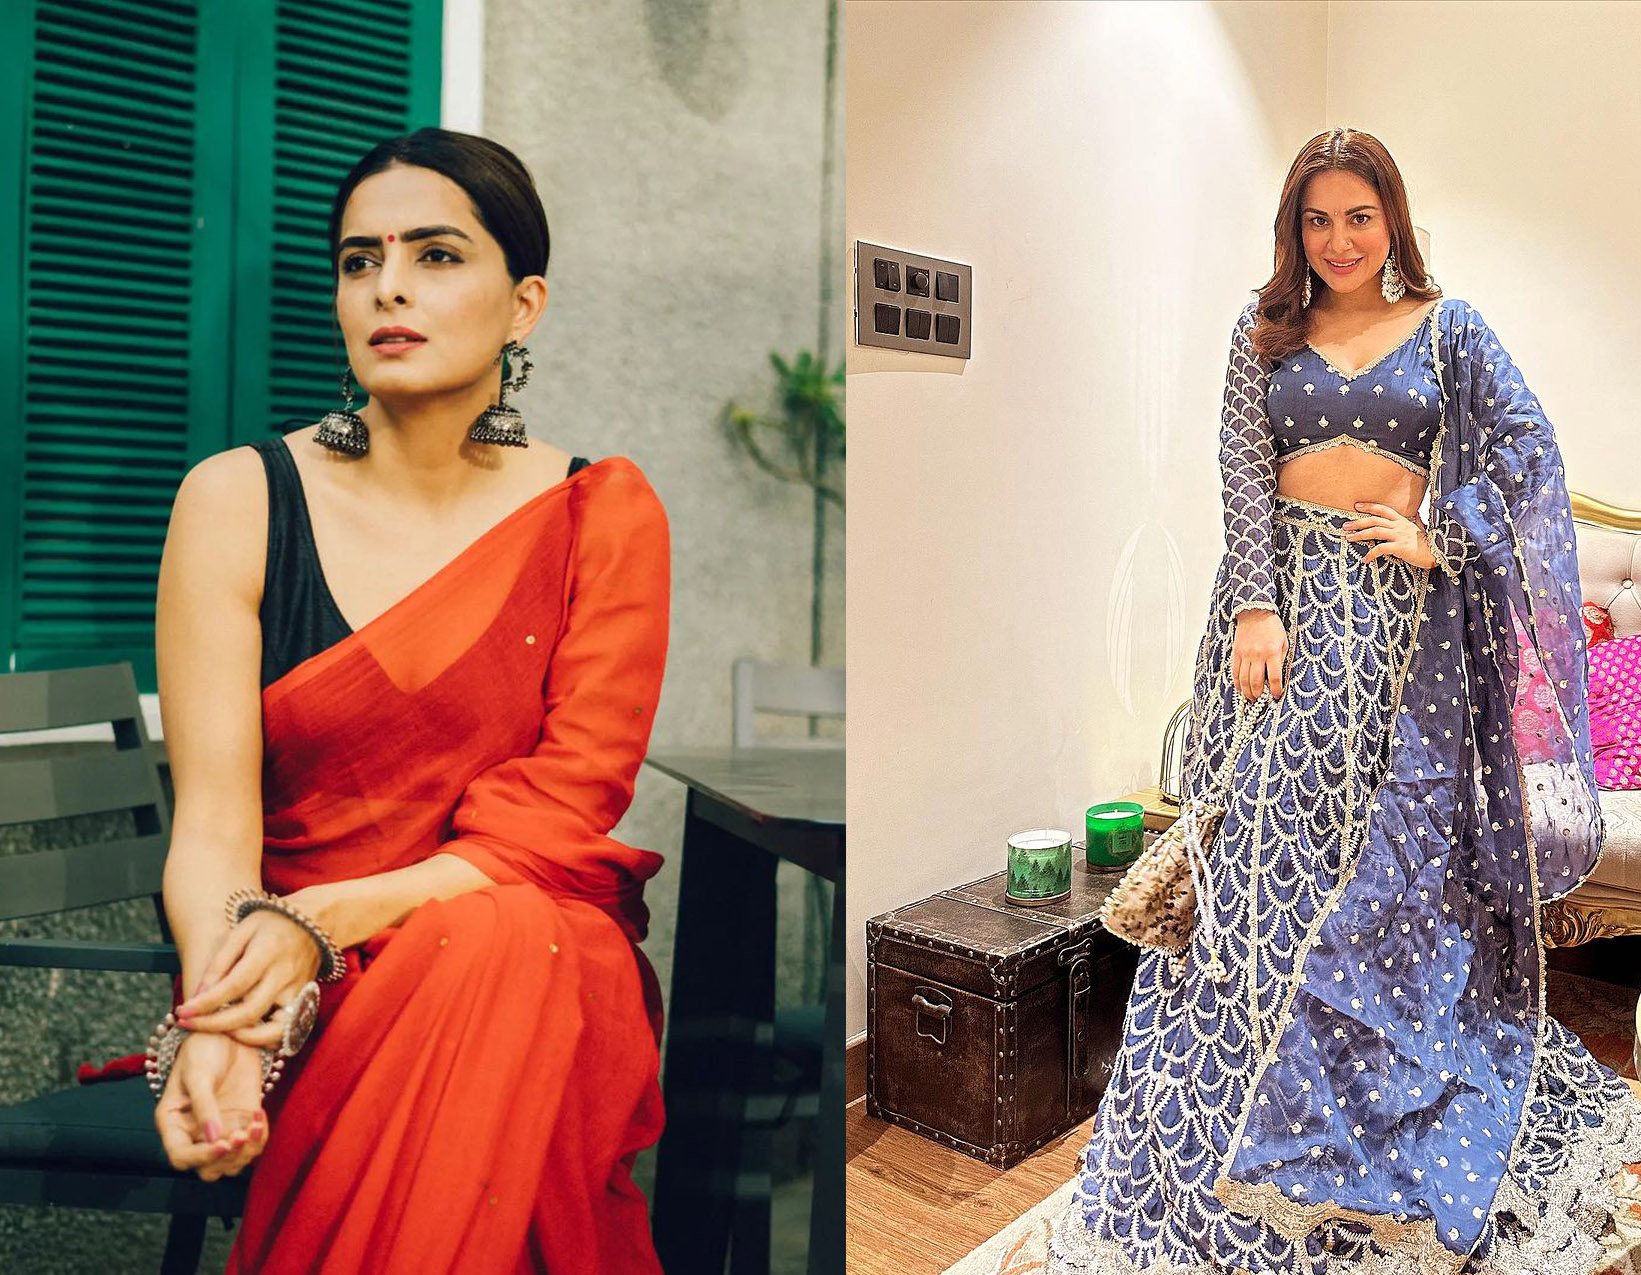 Kundali Bhagya Fame Actress Shraddha Arya Is All Set For Karwa Chauth And This Actress Applies Mehendi. Along With Her Actress Ruhi Chaturvedi Joins. 